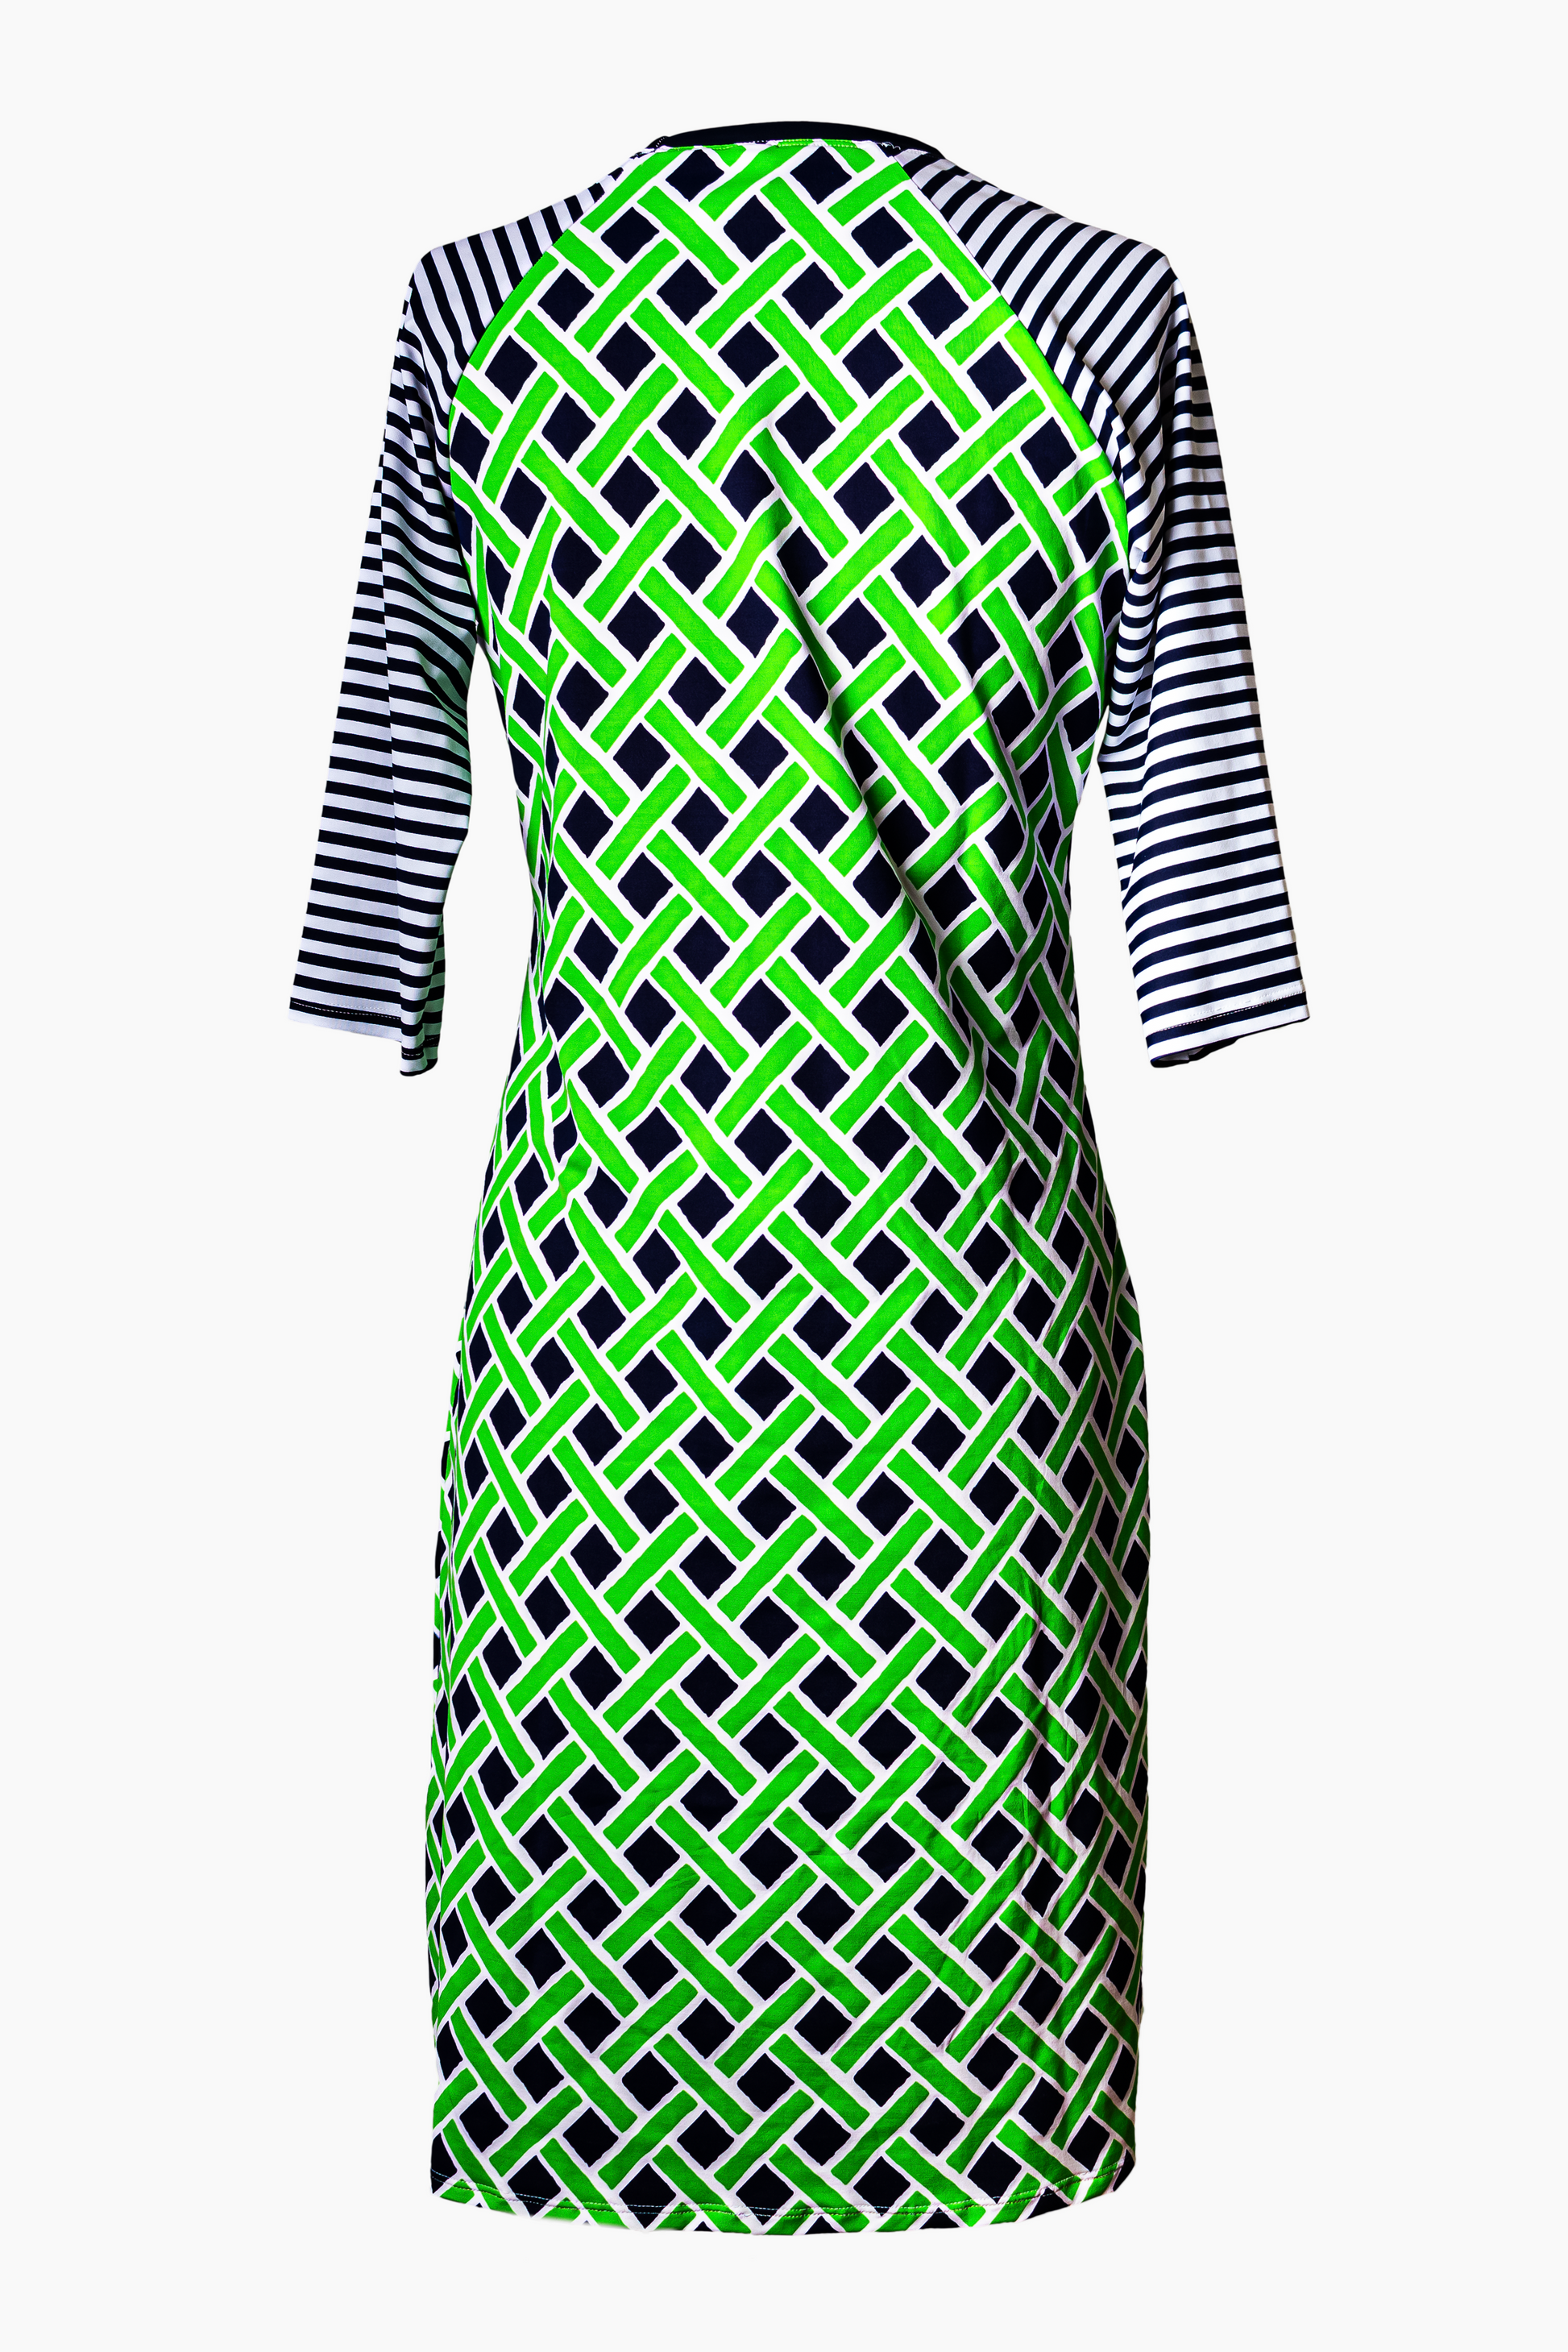 back view of womans modest swimdress in neon green and navy blue print with 3/4 inch sleeves